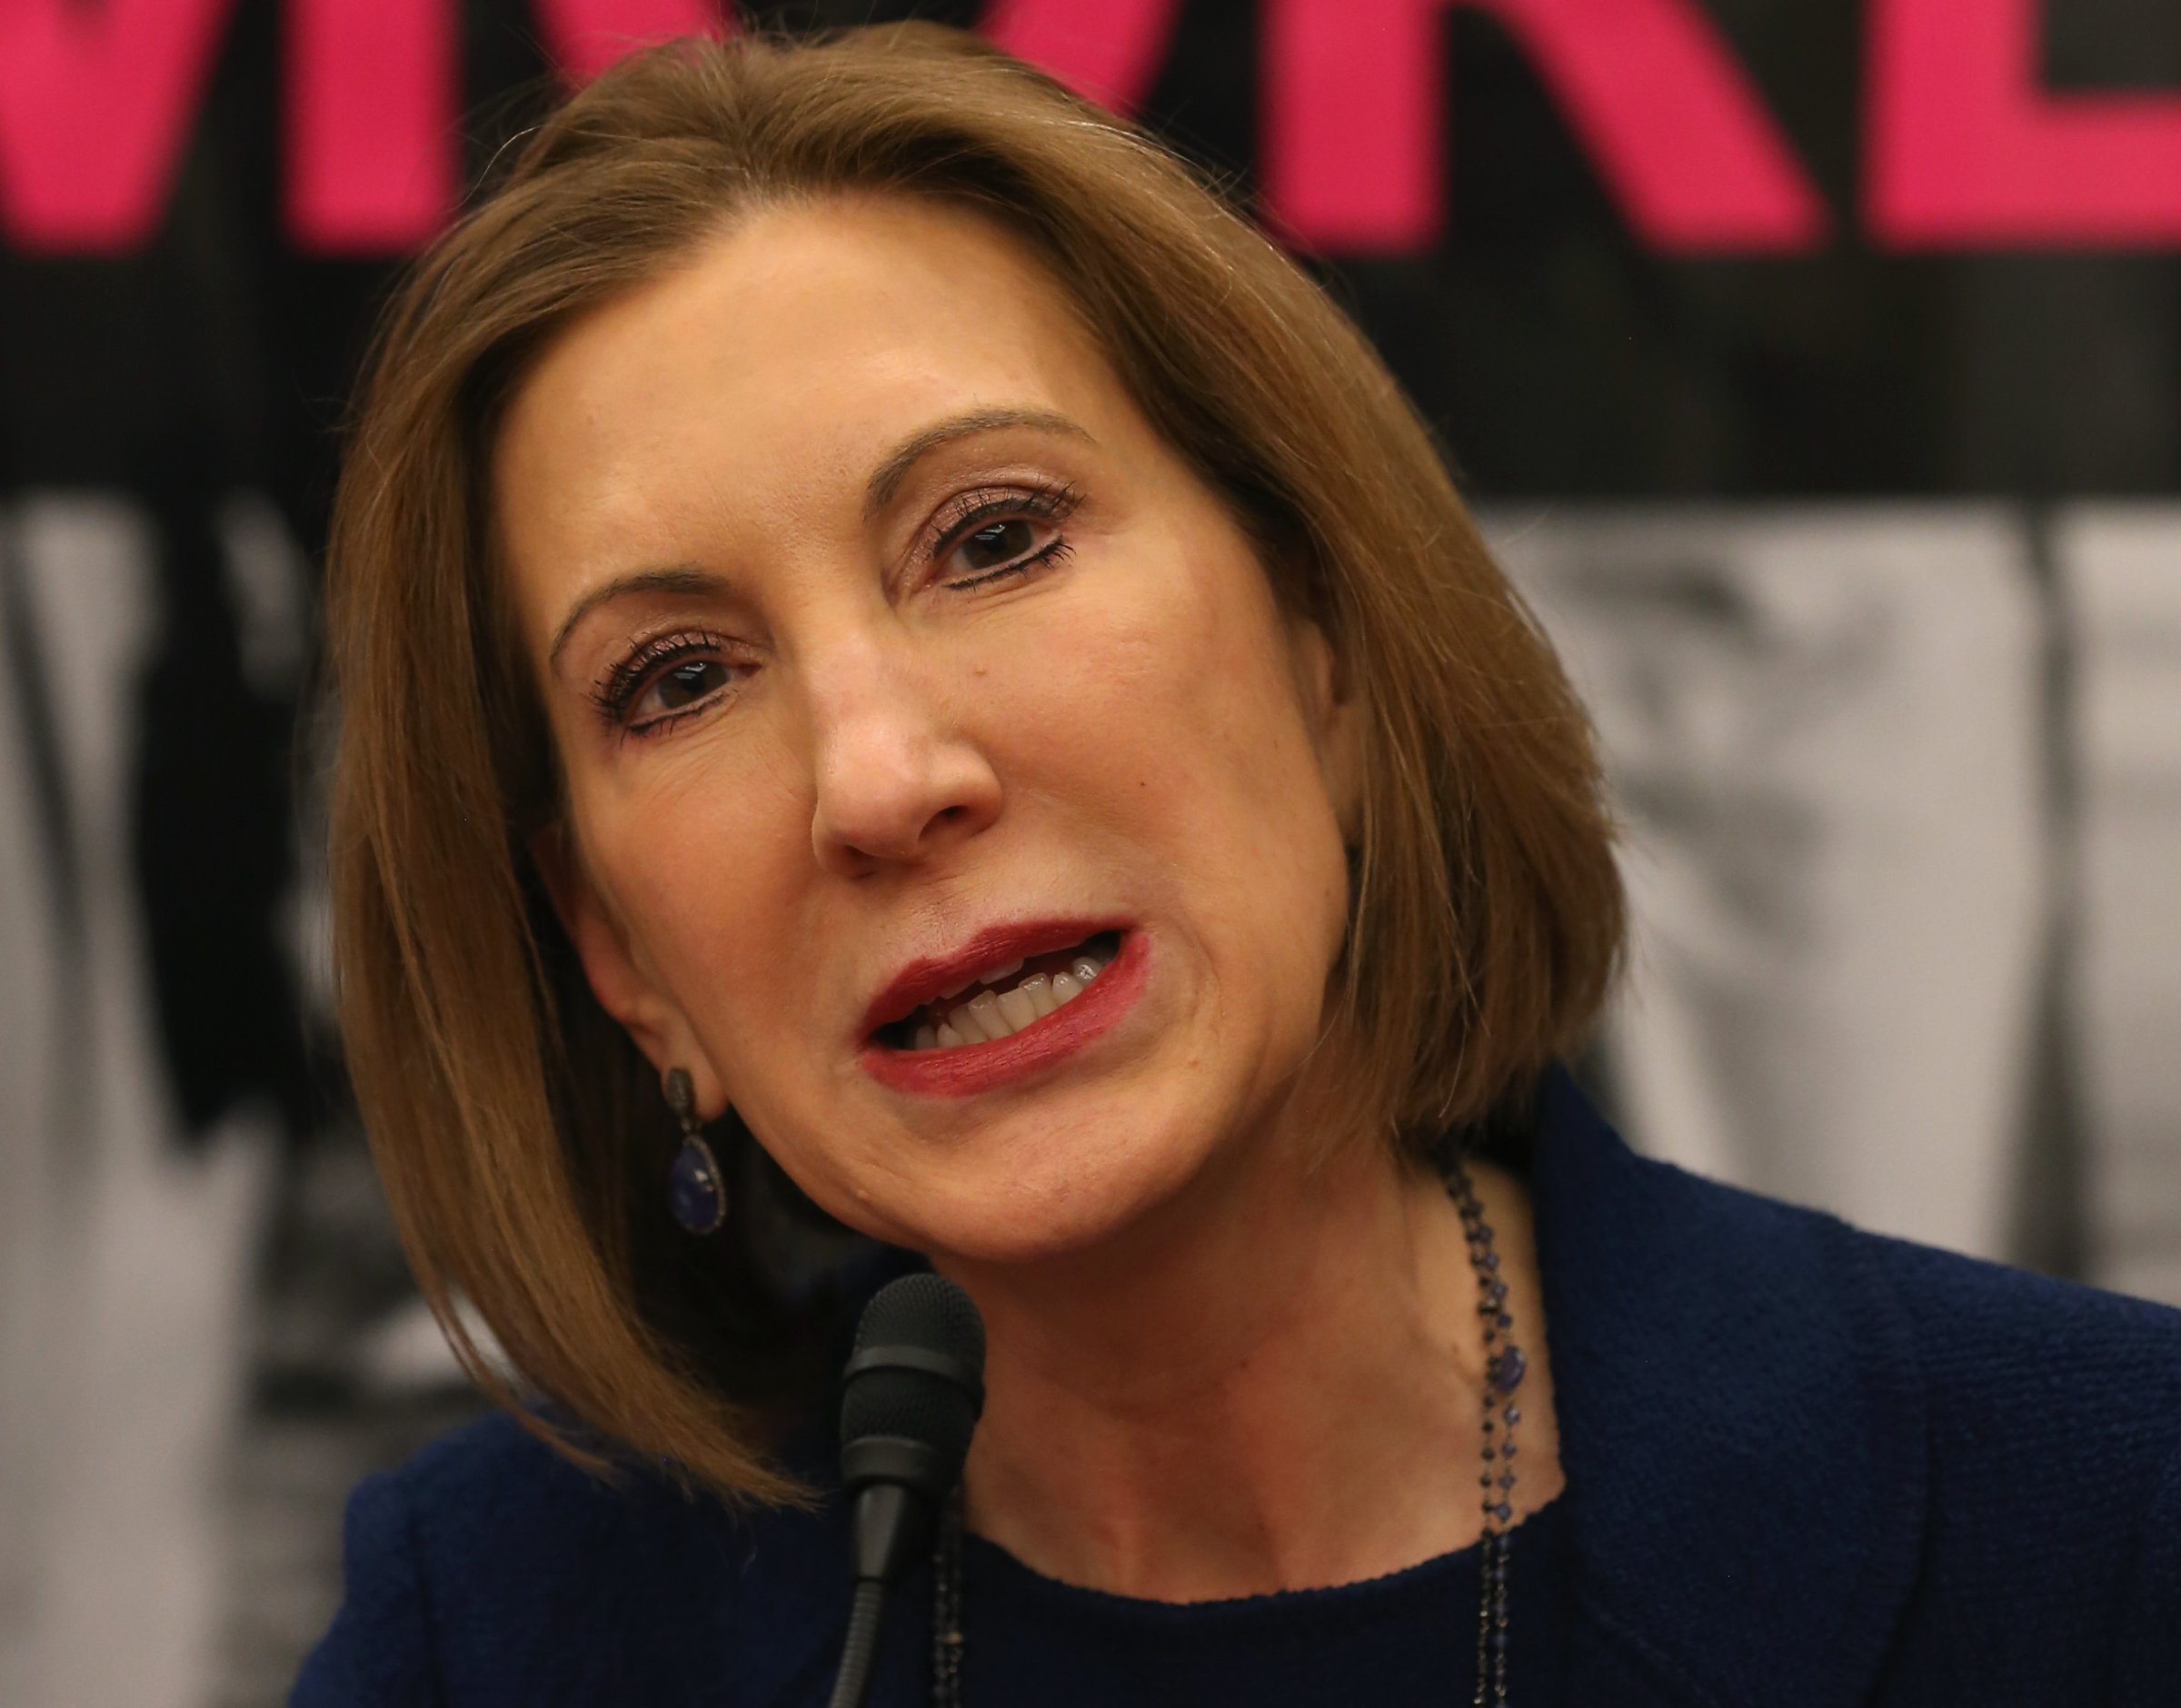 Carly Fiorina Speaks At Panel Discussion On Conservative Principles And Women